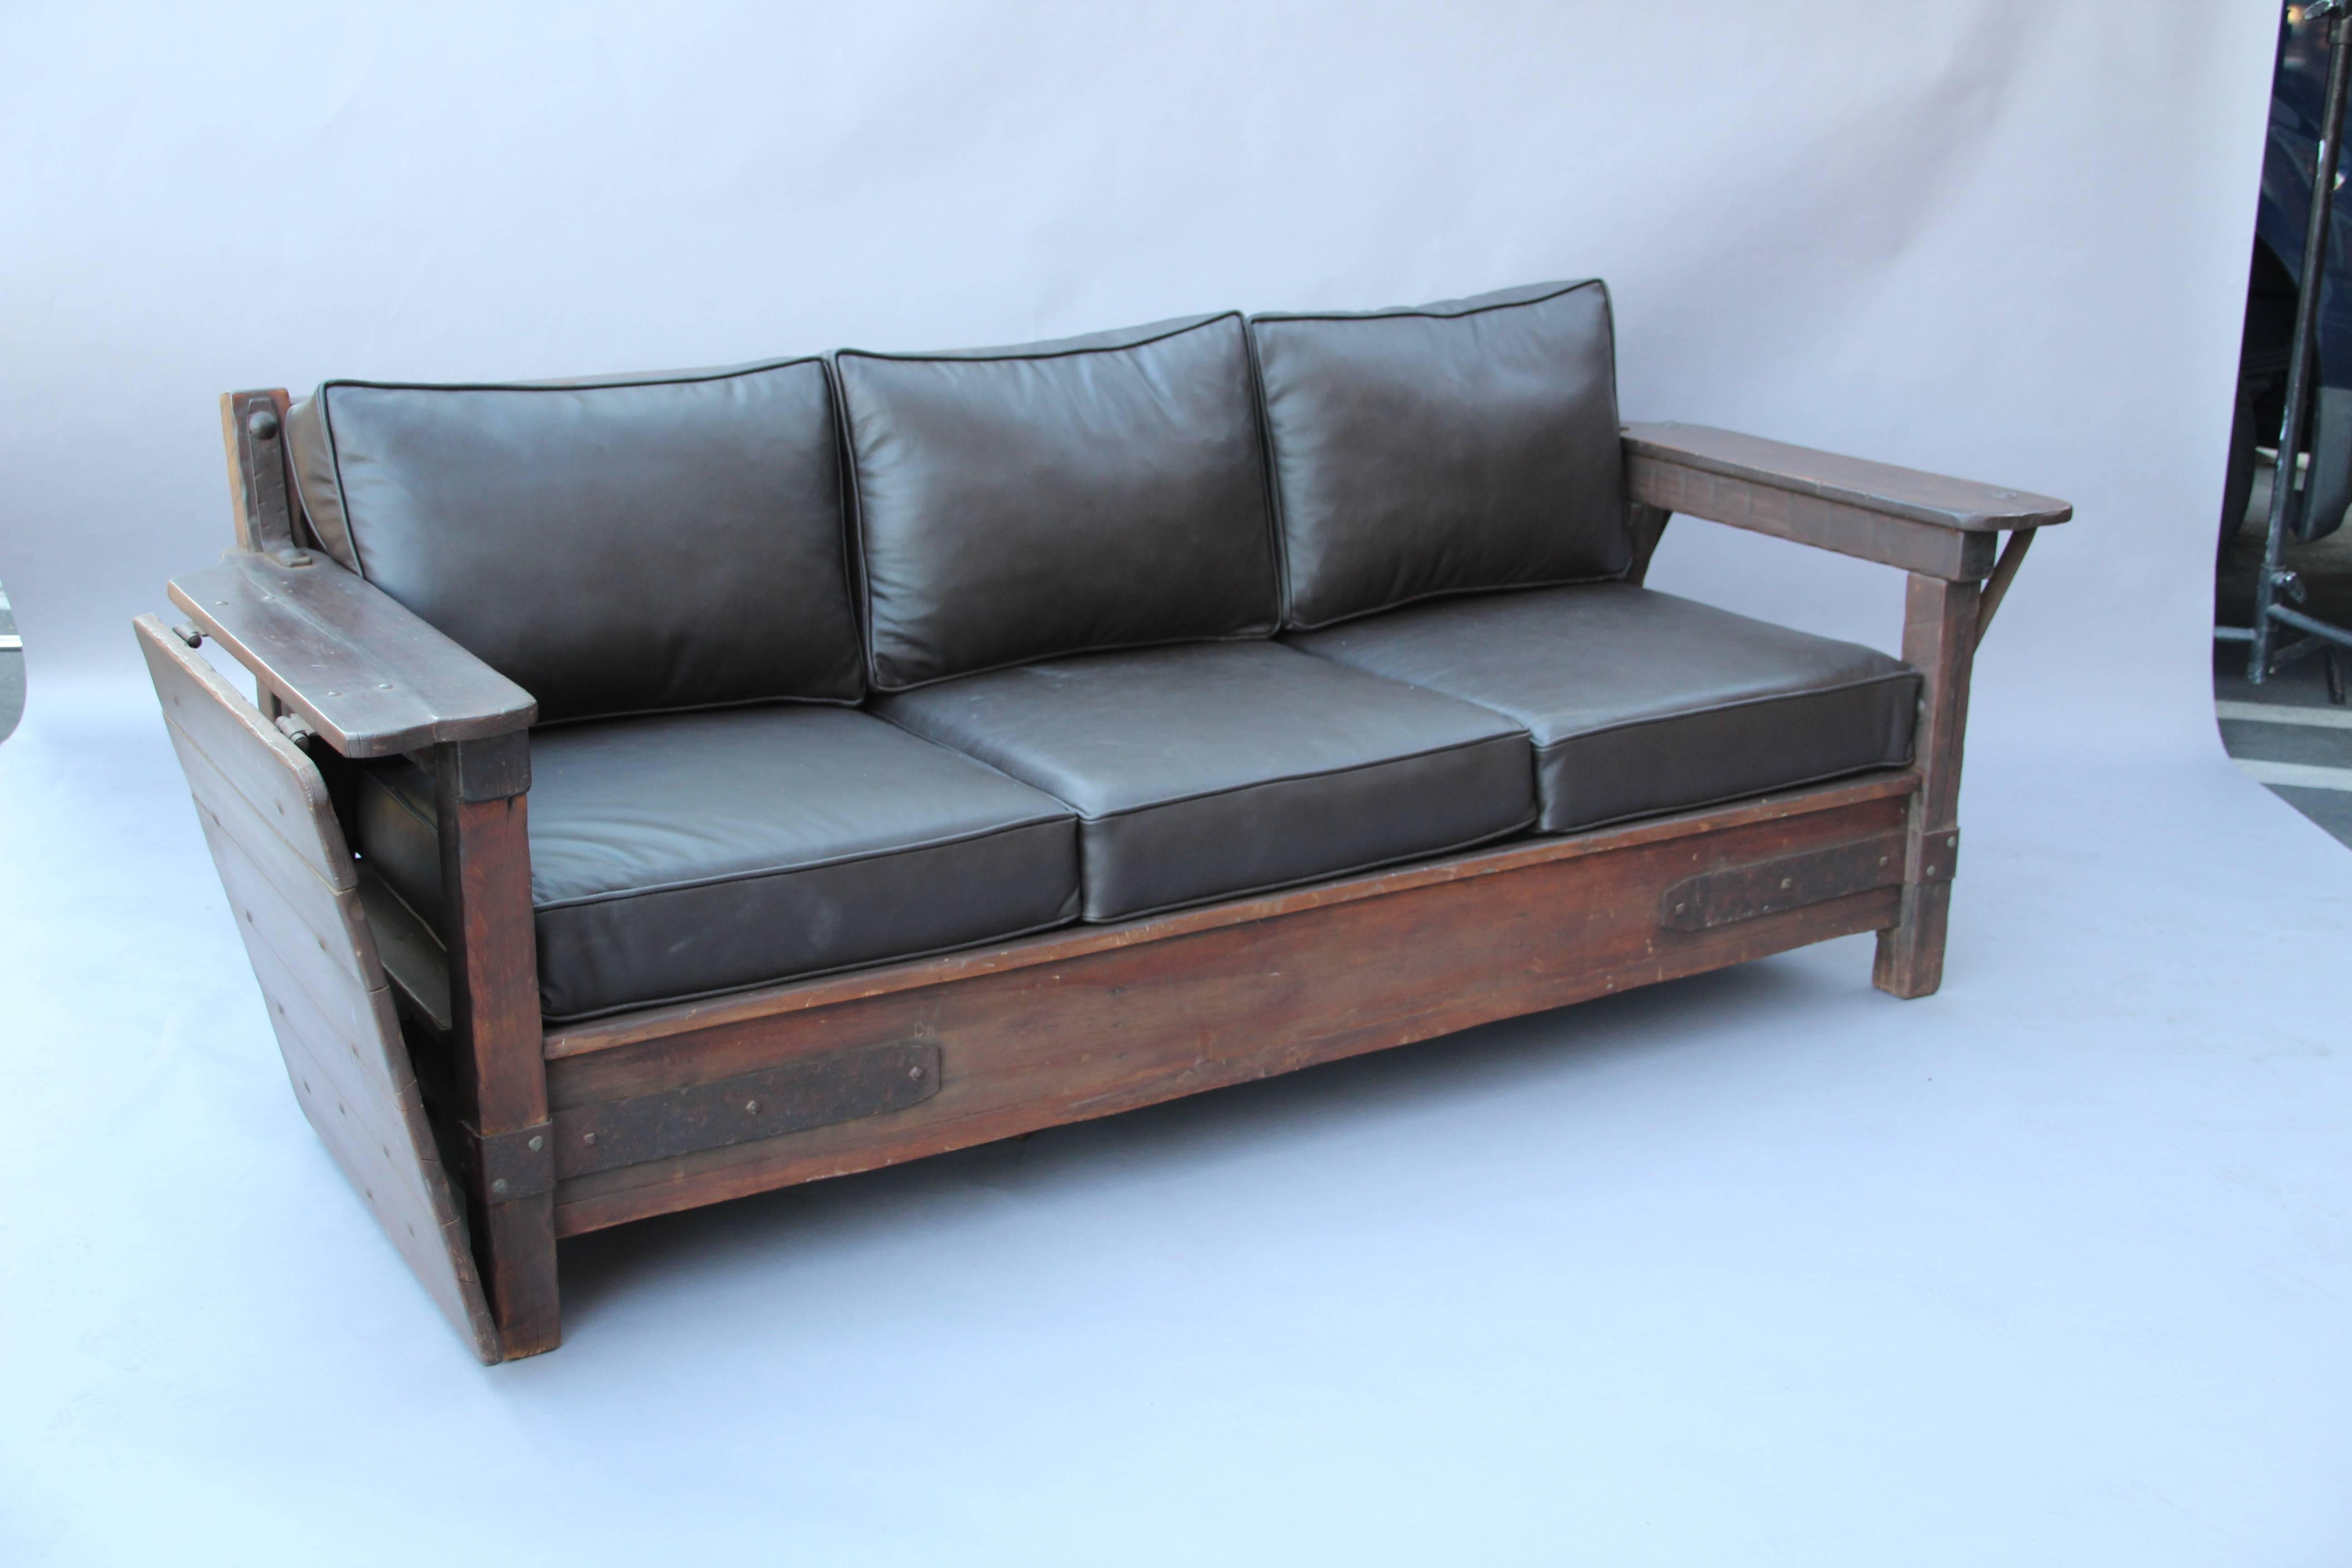 Rancho Monterey Signed Monterey Rancho Sofa with Drop Arm with Old Wood Finish